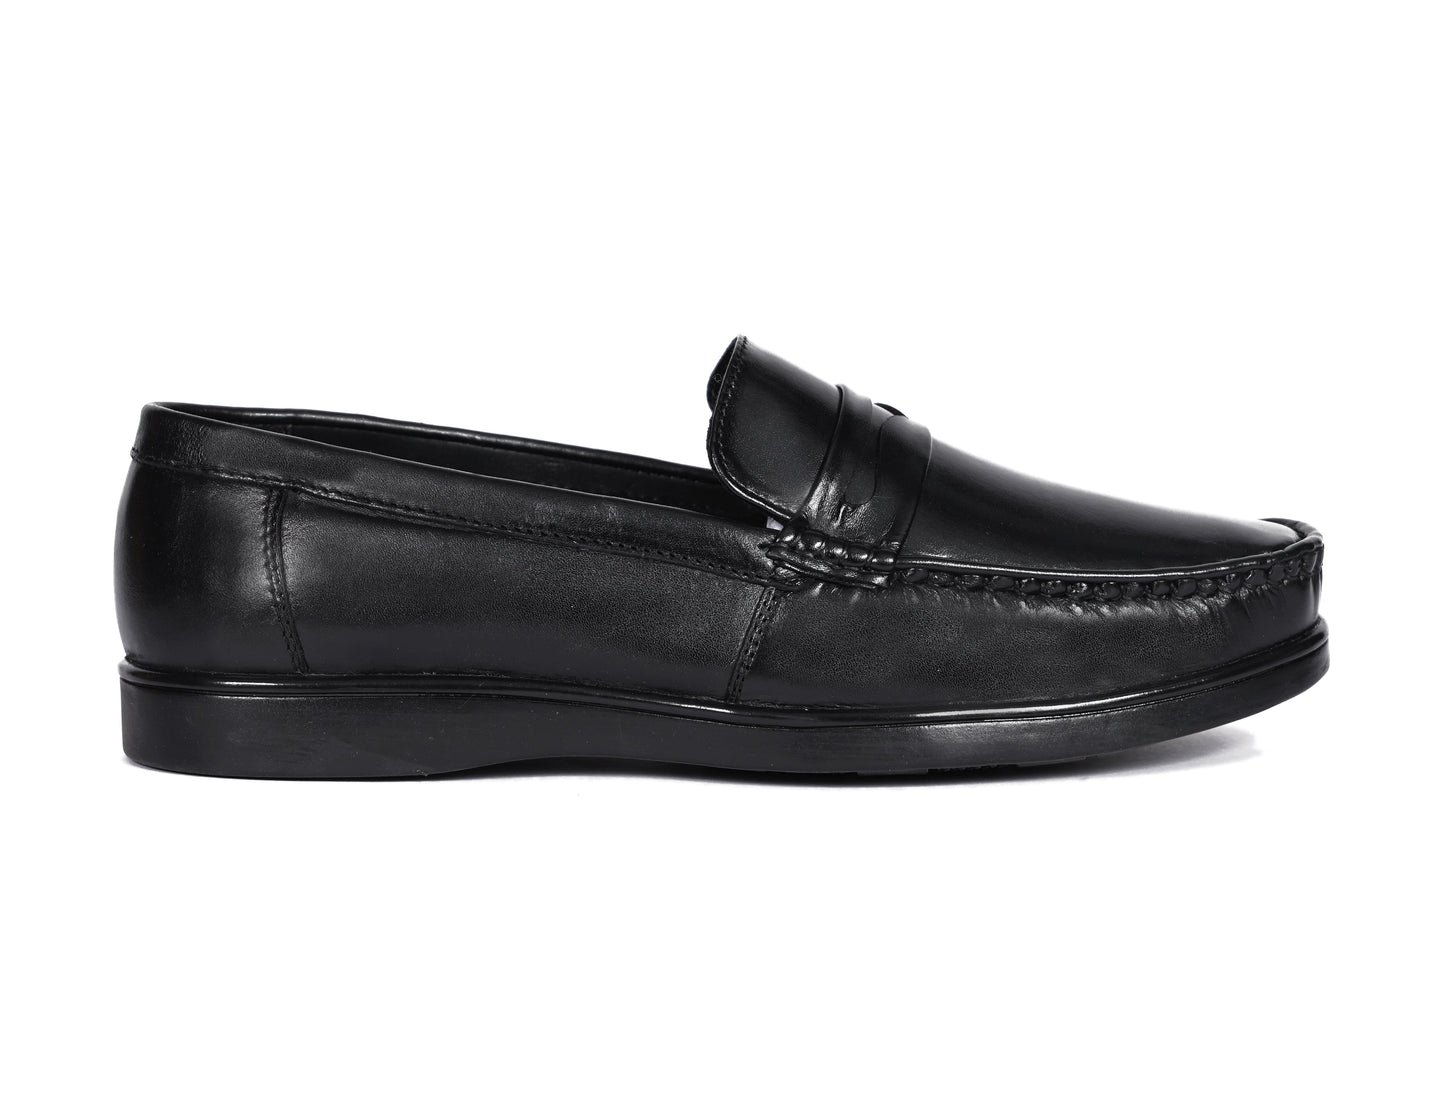 "Stride in Style: Black Casual Loafer Shoes" Art: LS-1104